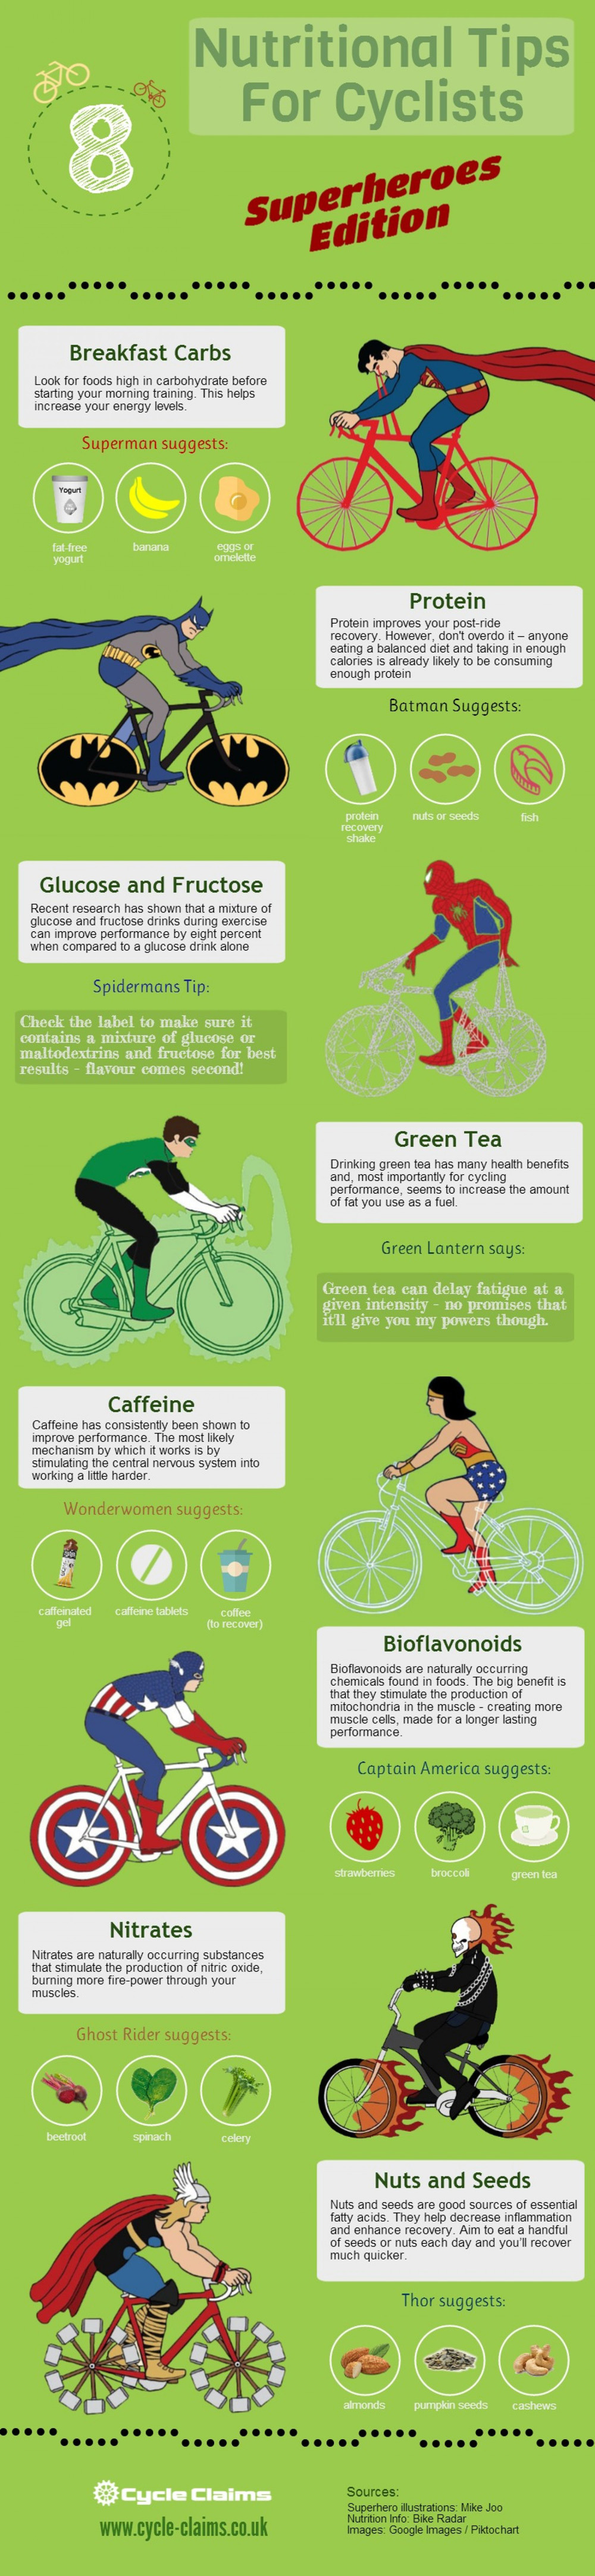 8-nutritional-tips-for-cyclists_5384ae4c5e7d2_w1500